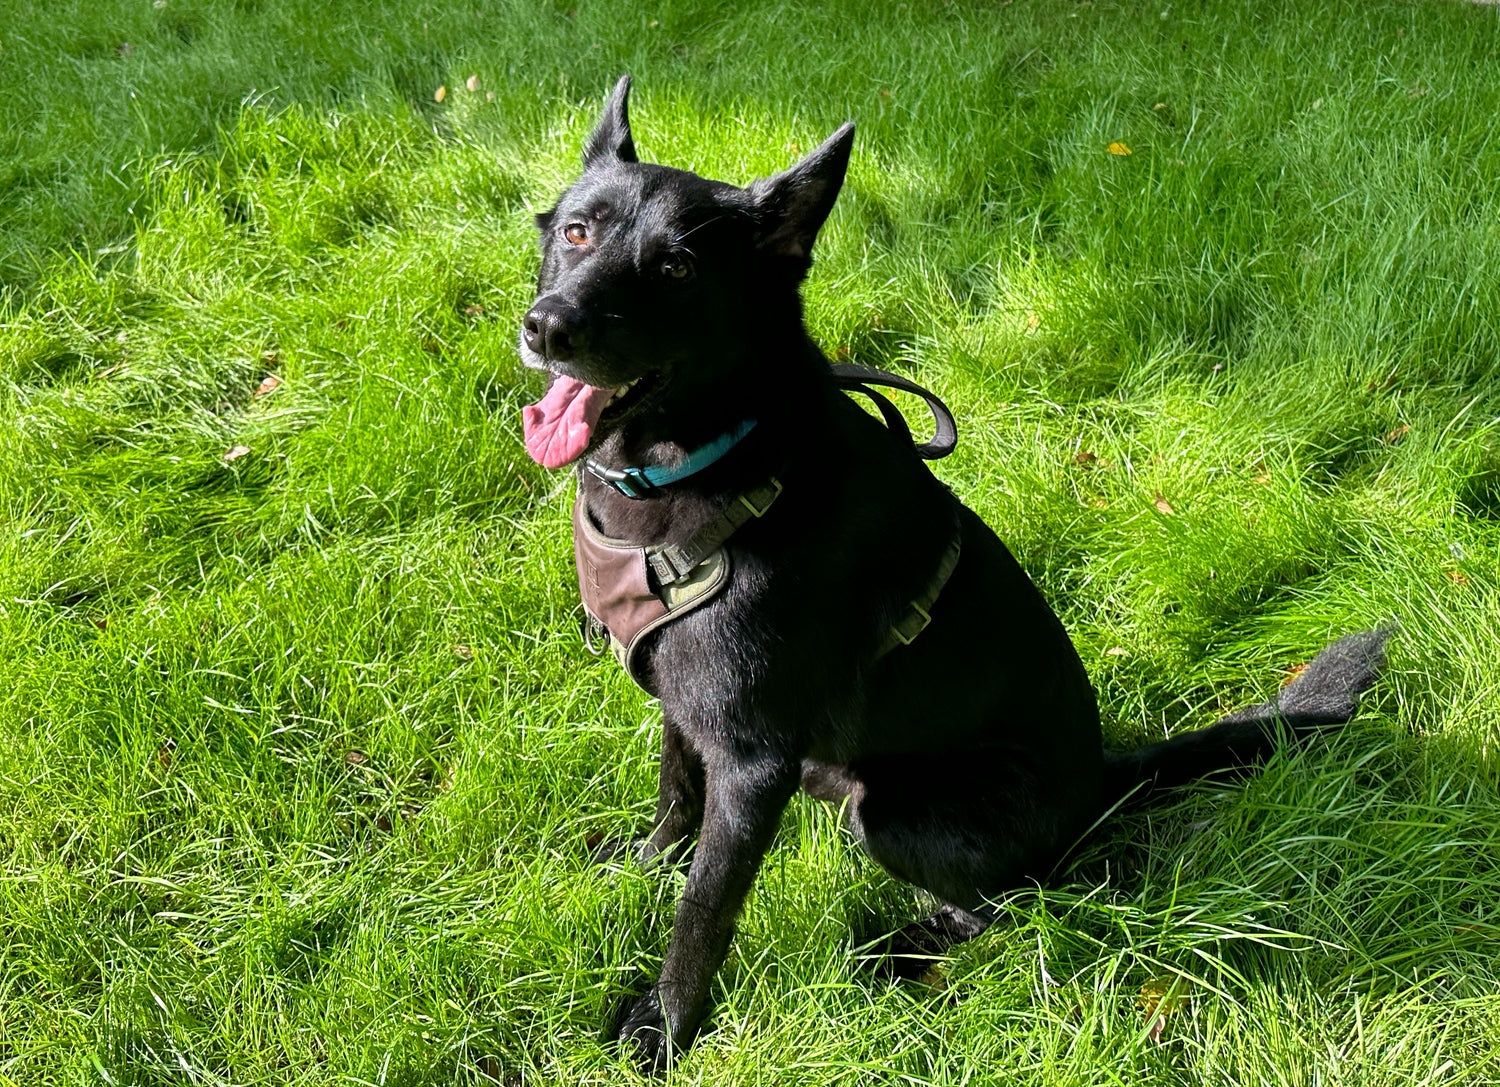 A handsome picture of Fenrir, a black German Shepard mix, smiling in a grassy field.